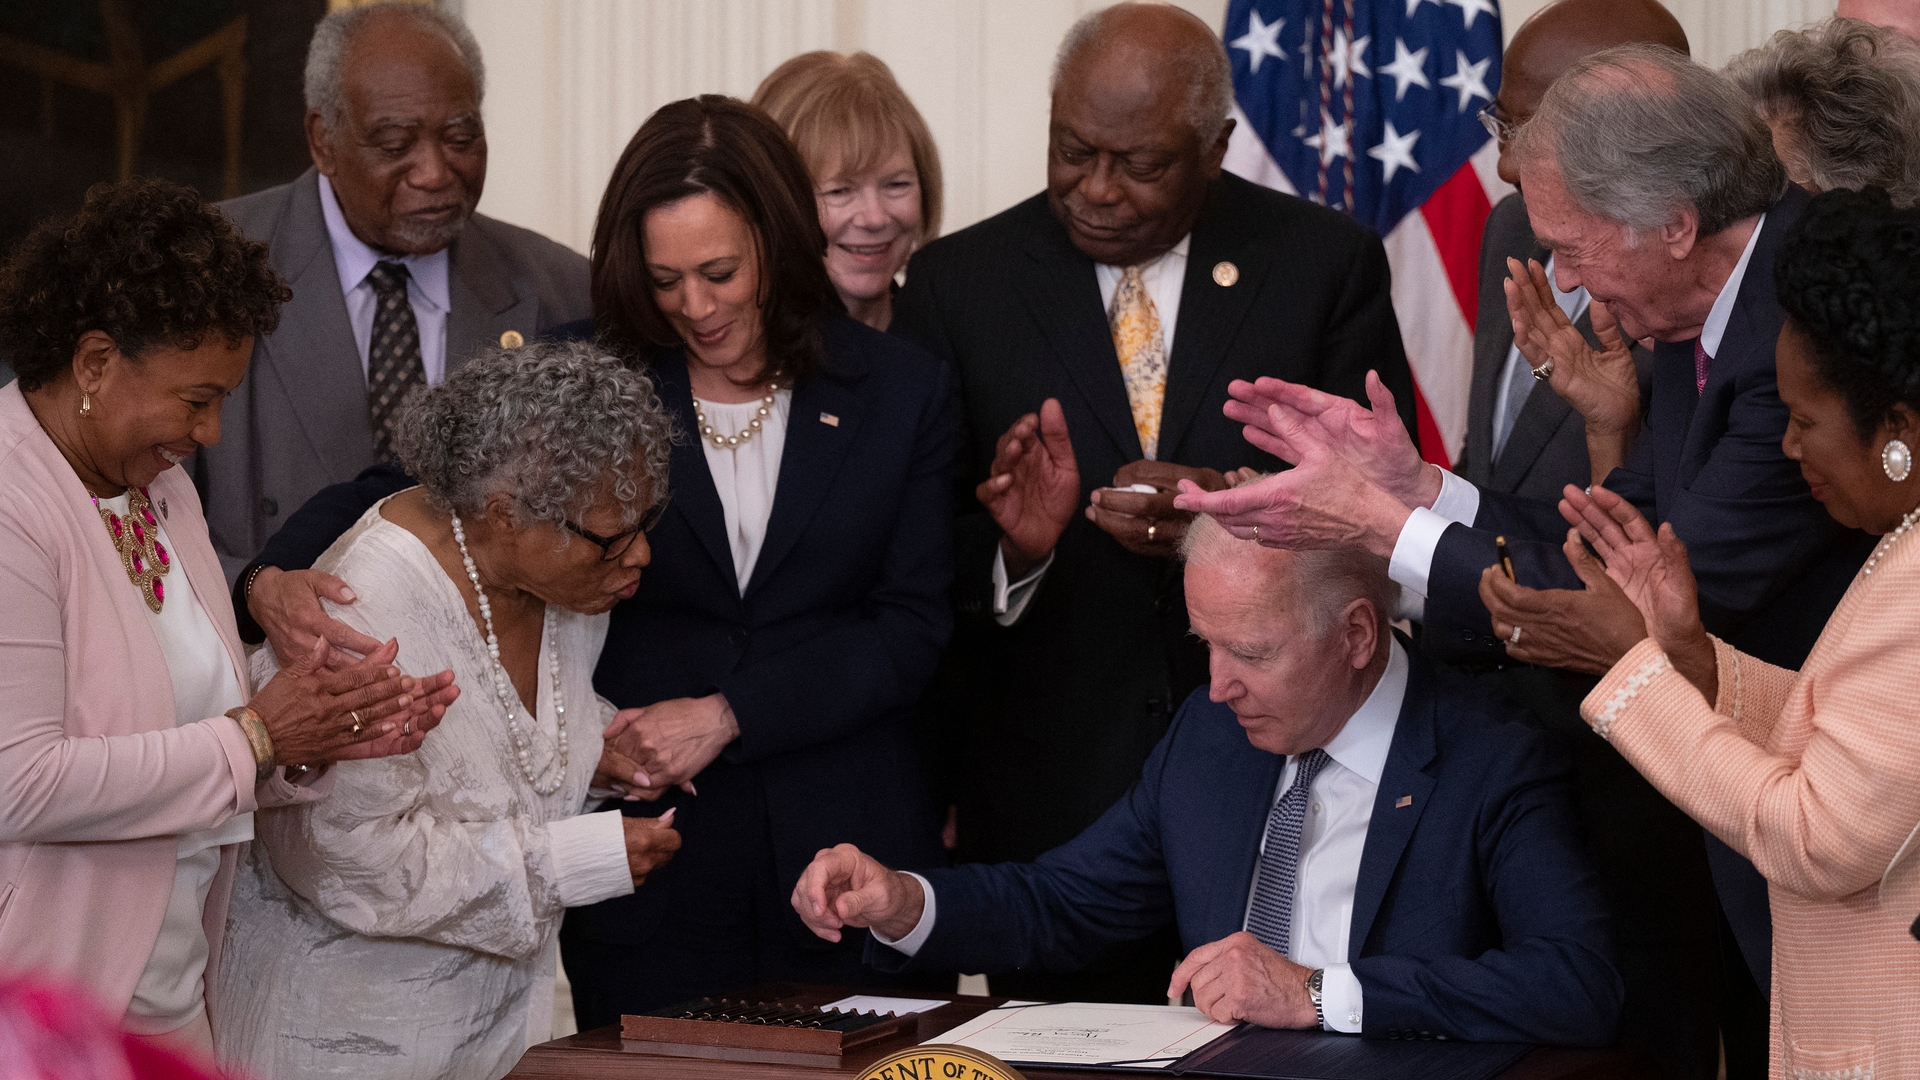 President Biden signs the Juneteenth National Independence Day Act into law